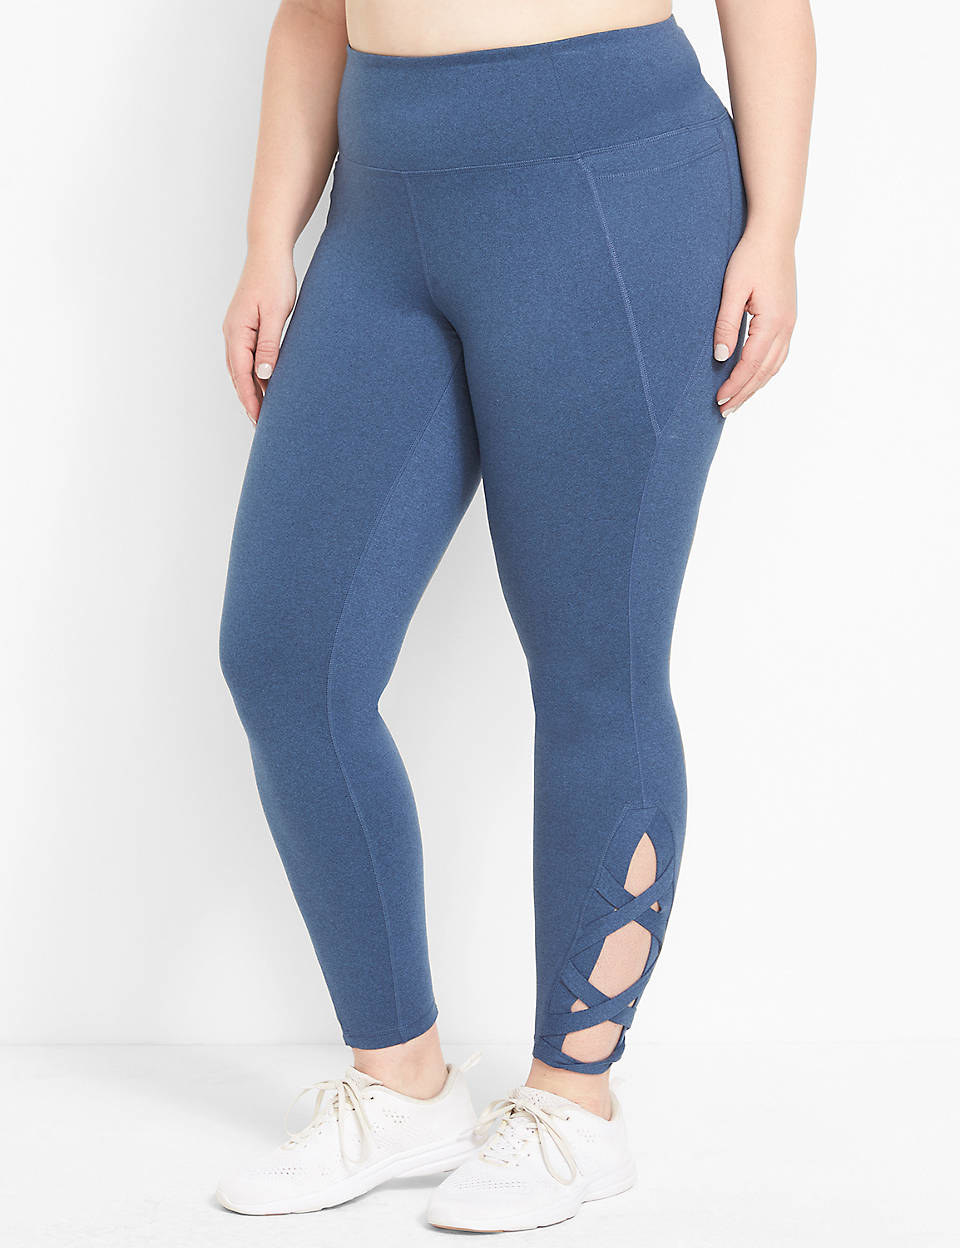 Model is wearing pale blue leggings with a criss cross cut out near the ankles